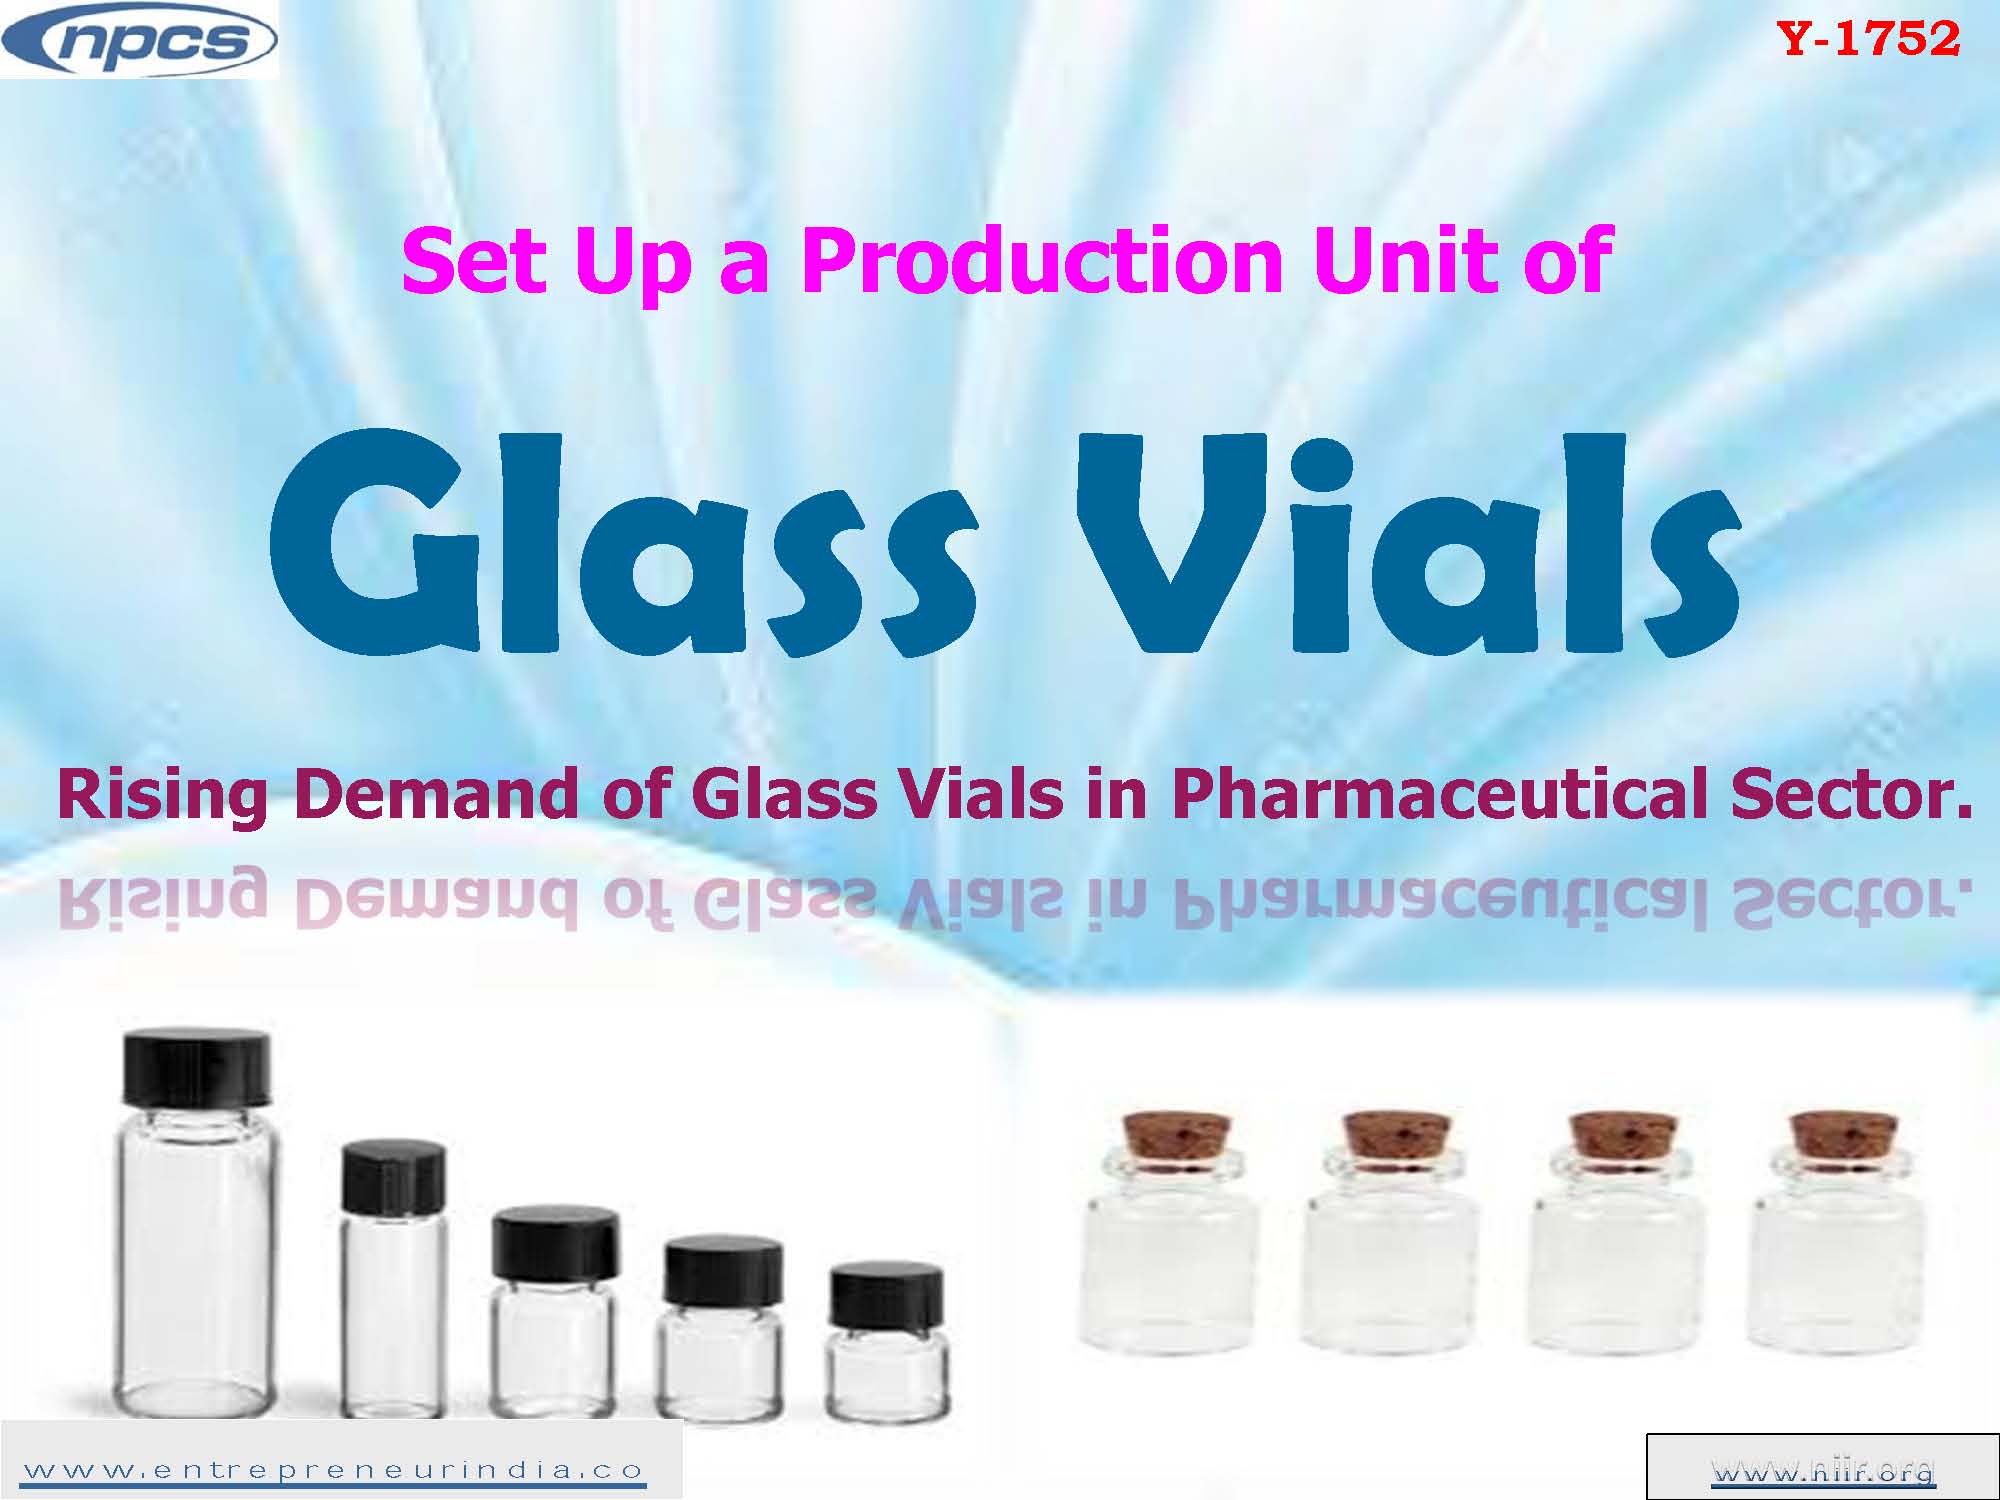 Set Up a Production Unit of Glass Vials Rising Demand of Glass Vials in Pharmaceutical Sector